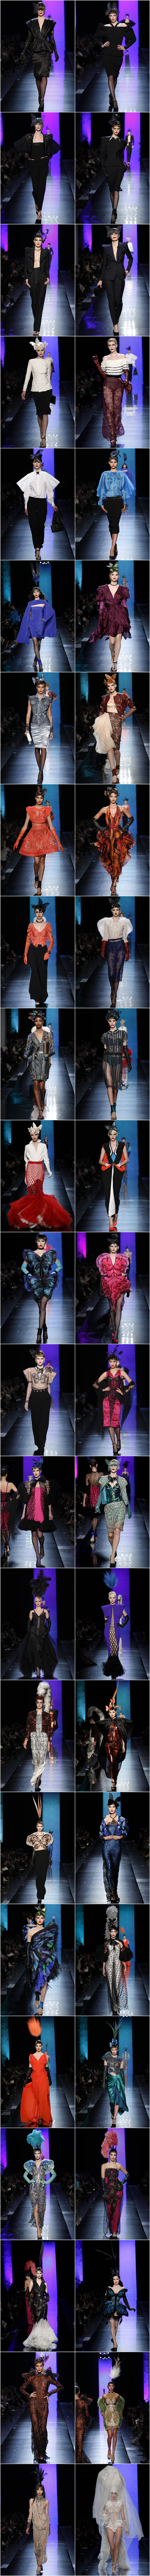 jean-paul-gaultier-haute-couture-spring-2014-fashion4addicts.com